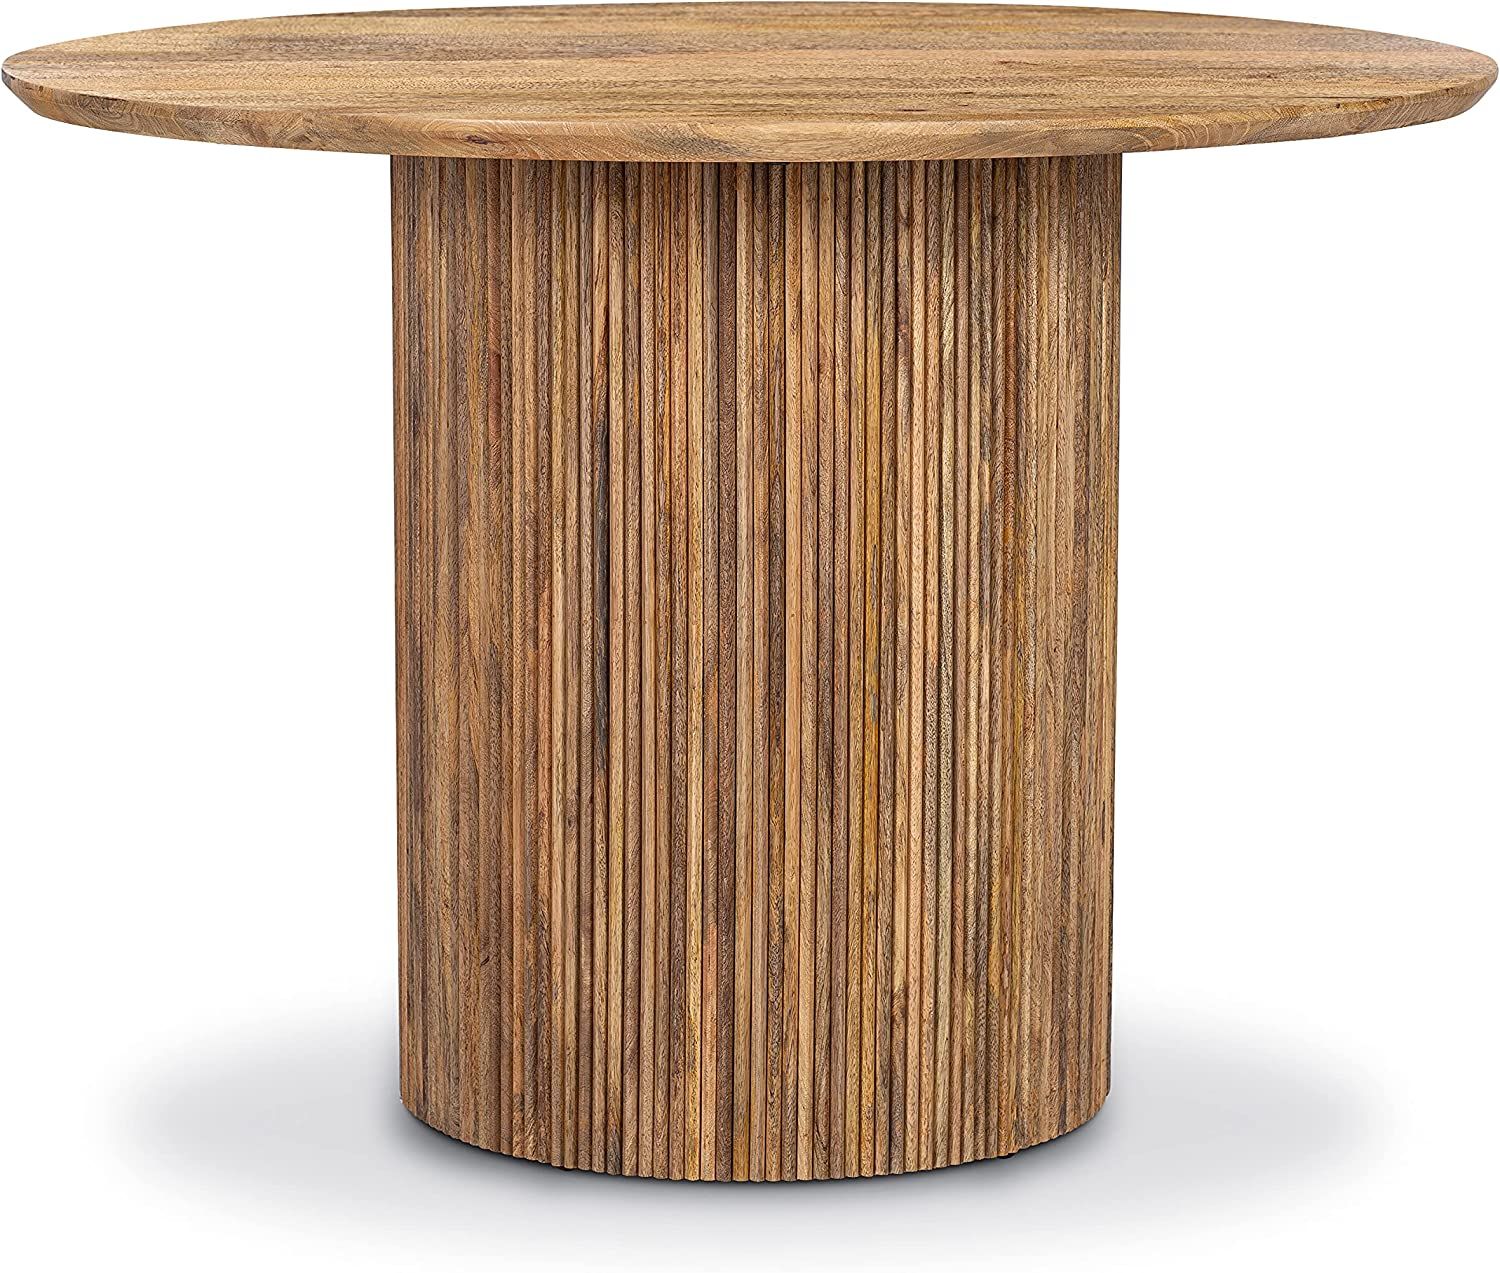 POLY & BARK Deja 40" Round Dining Table, Natural | Amazon (US)